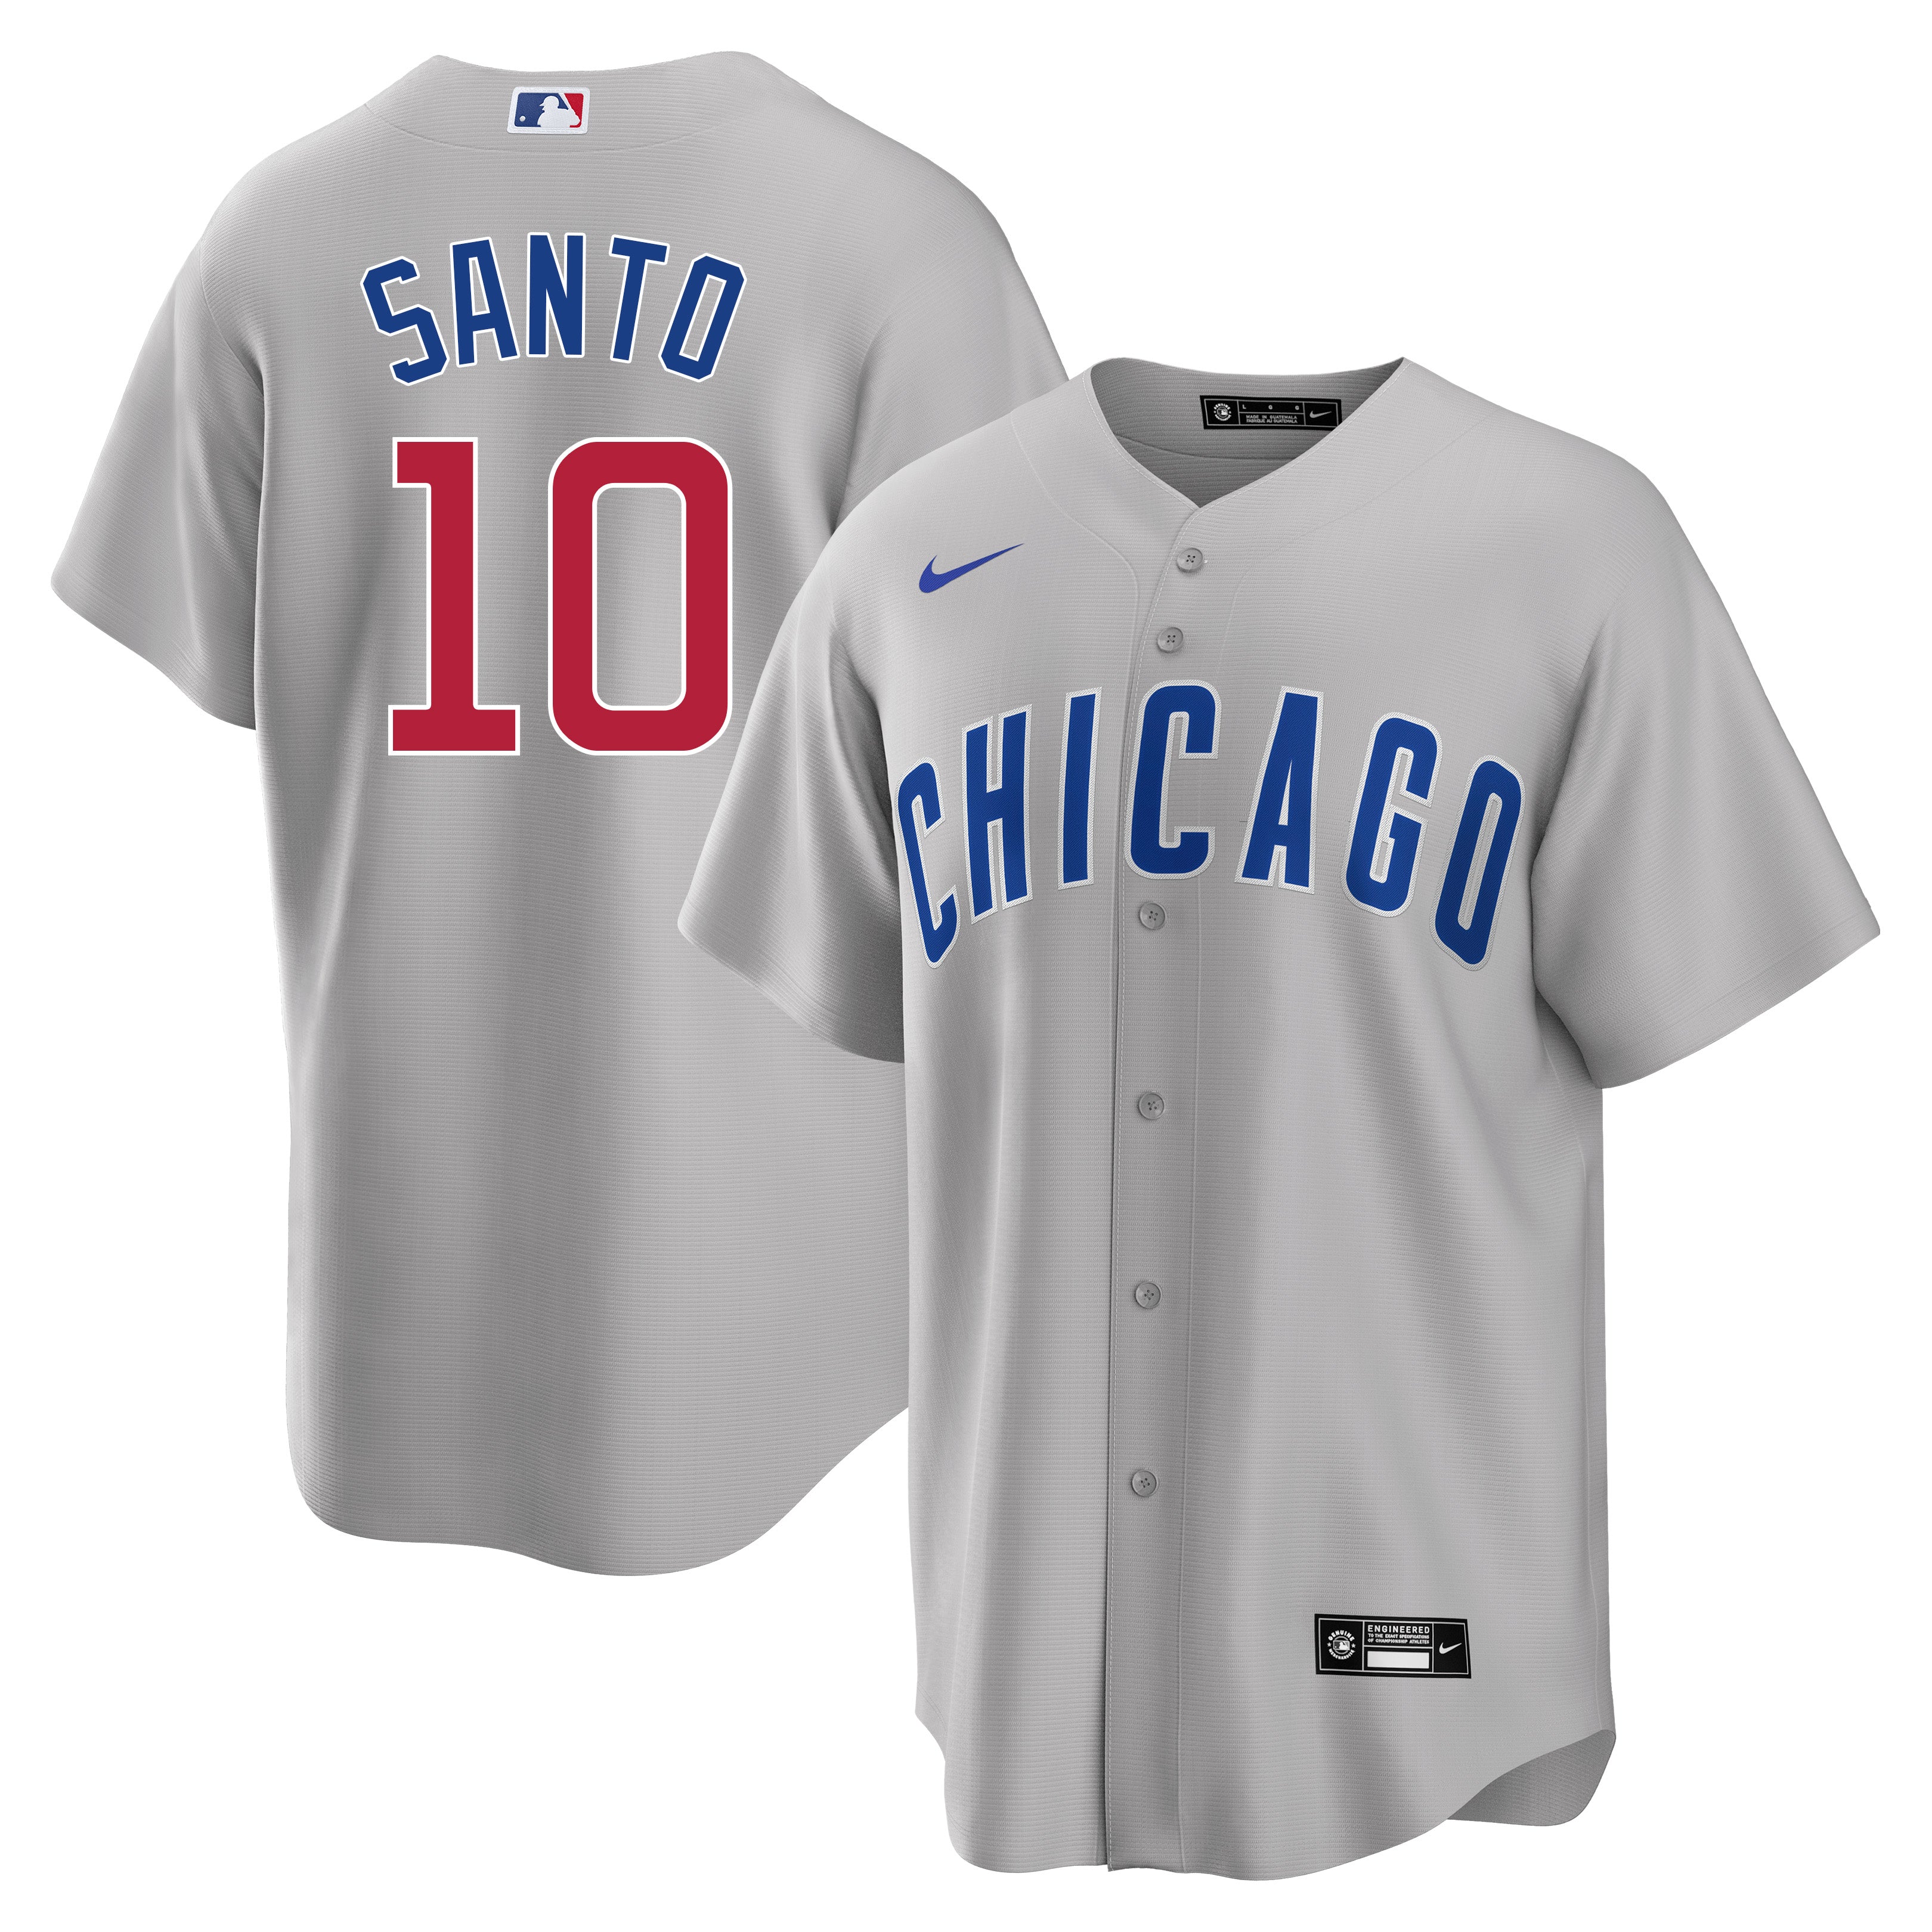 Ron Santo Chicago Cubs Home White & Road Grey Men's Jersey w/  Patch